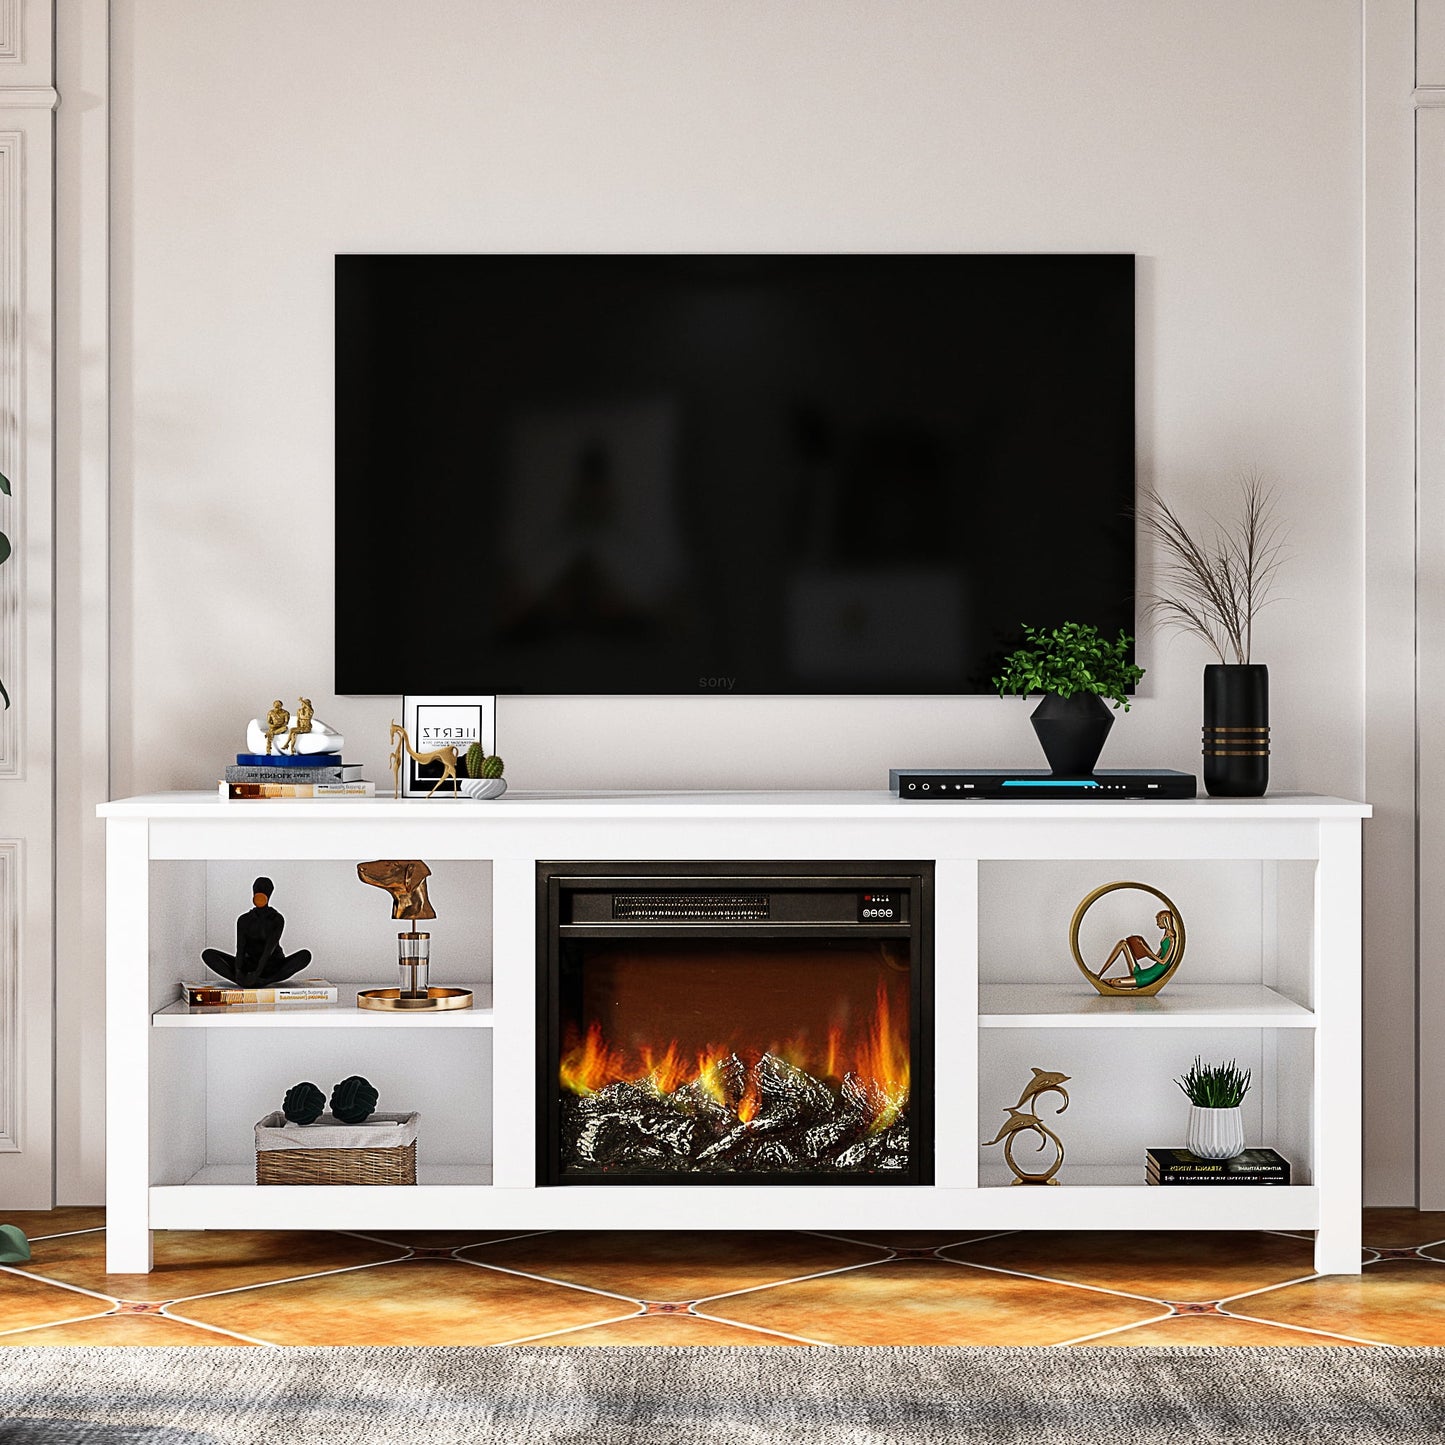 TV Stand with Fireplace, Modern TV Cabinet for TVs up to 65 inch, Electric Fireplace TV Stand with Storage, Entertainment Center Console Table, for Living Room Bedroom, Espresso, D3183